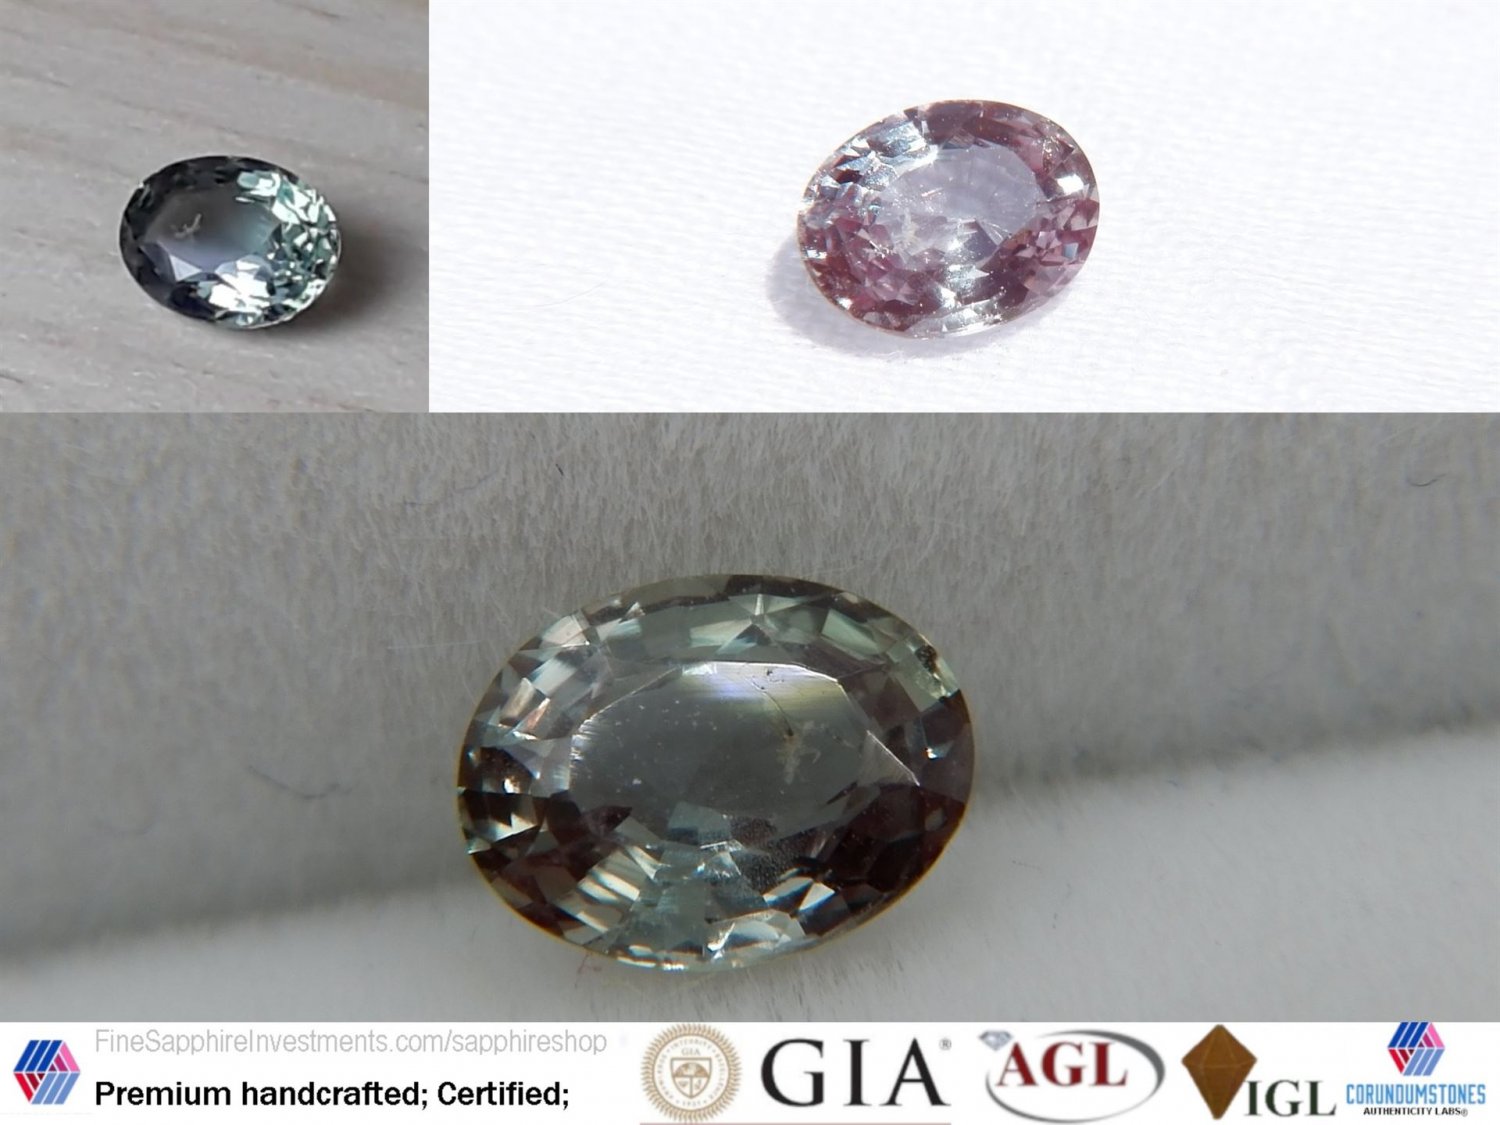 0.45 ct  Alexandrite 85% color change, purple/green|GIA premium handcrafted step cut with lustrous f